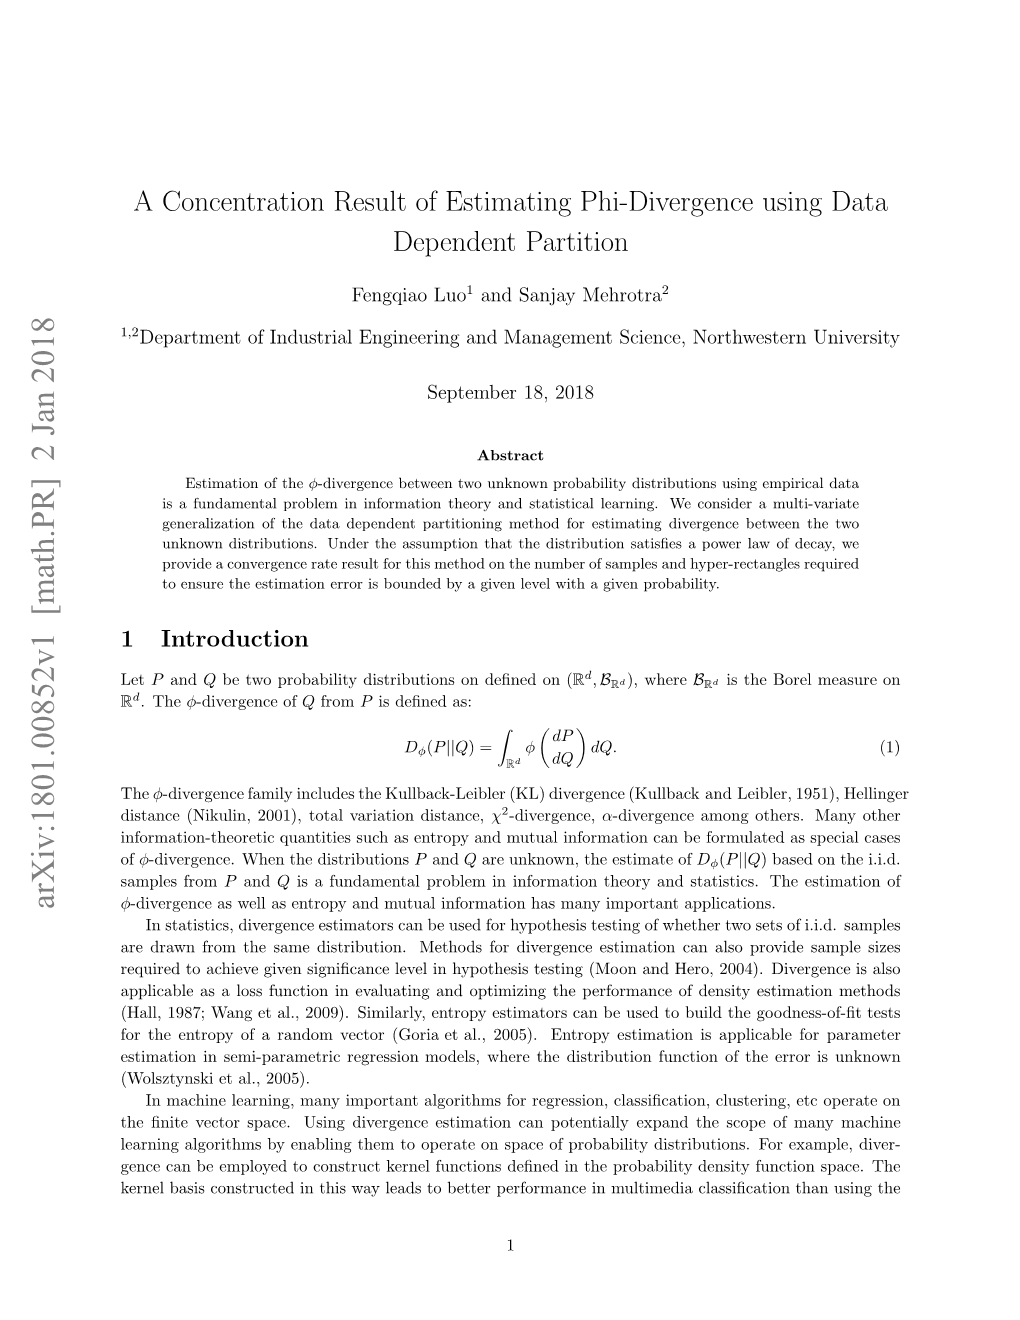 A Concentration Result of Estimating Phi-Divergence Using Data